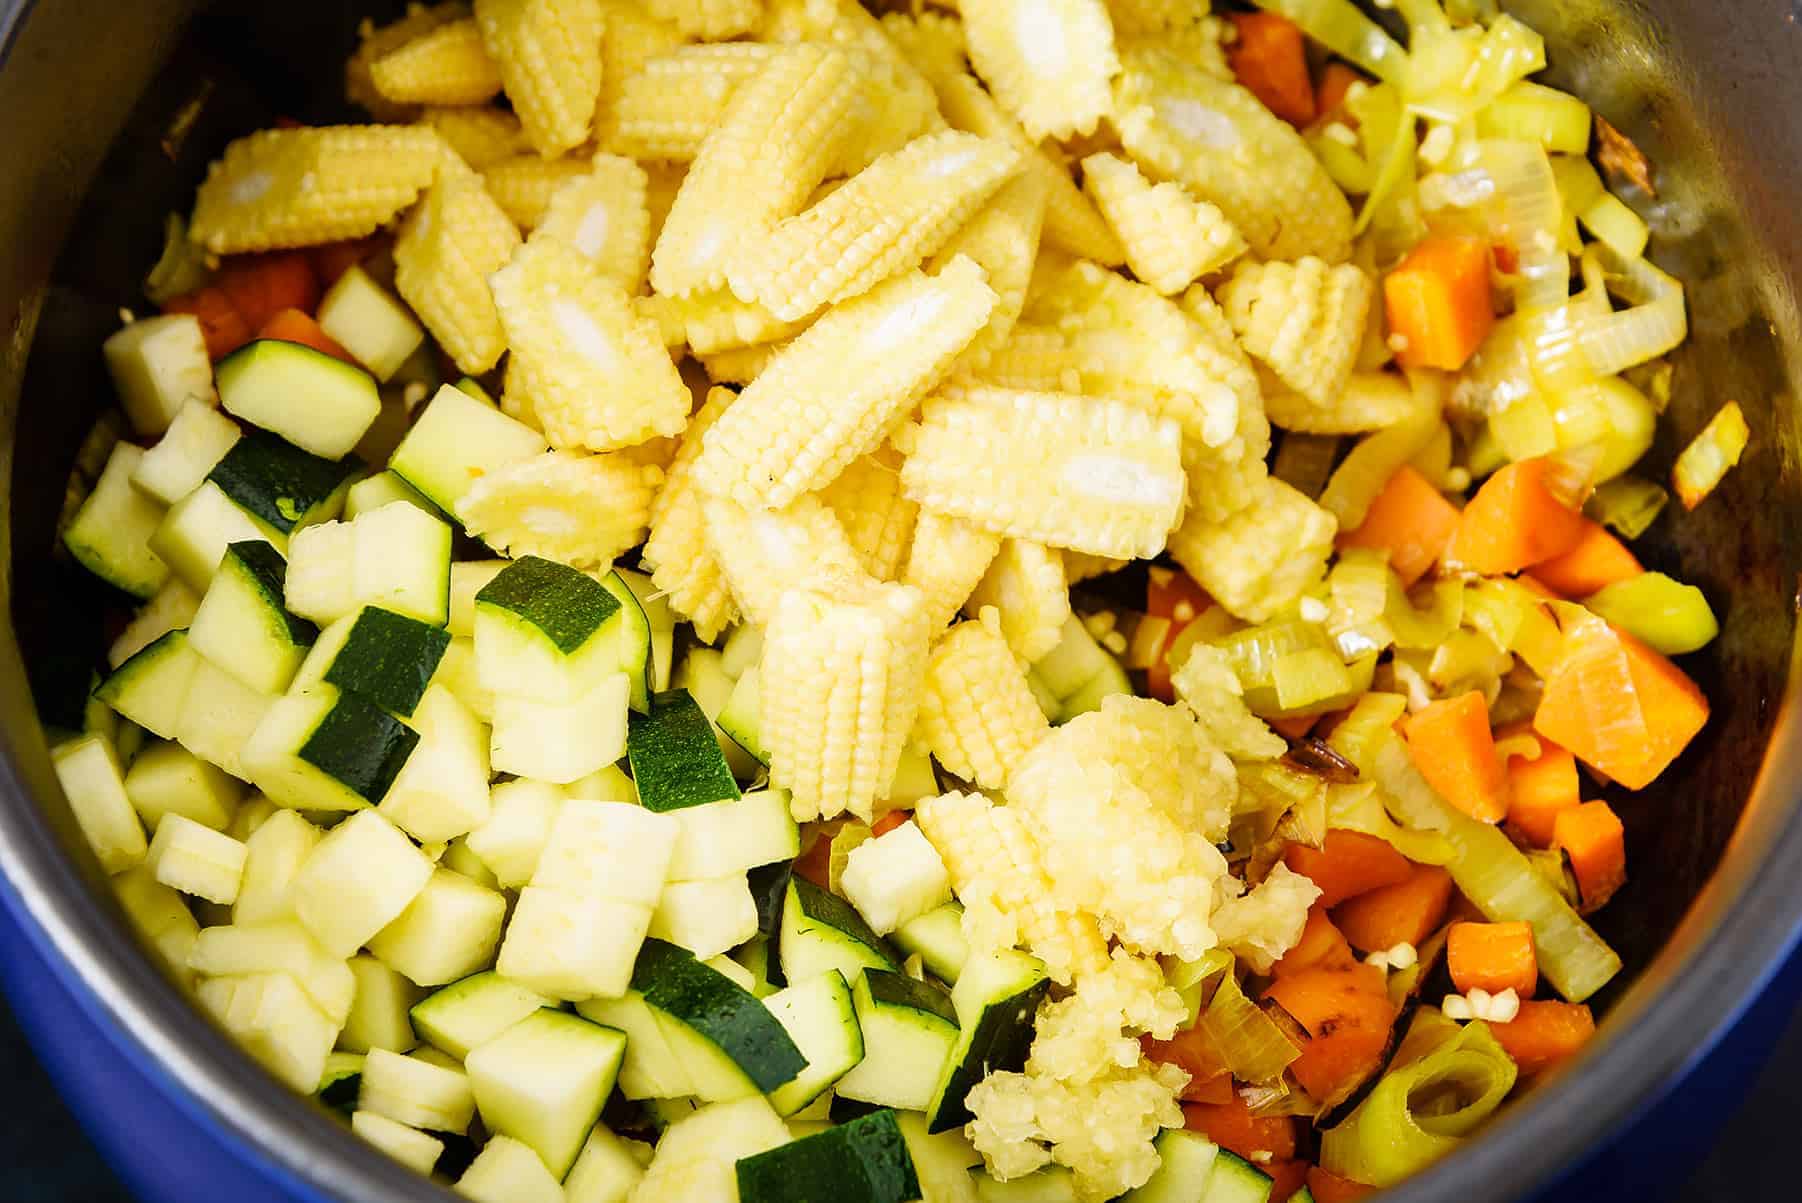 Adding courgettes and baby corn to the pan